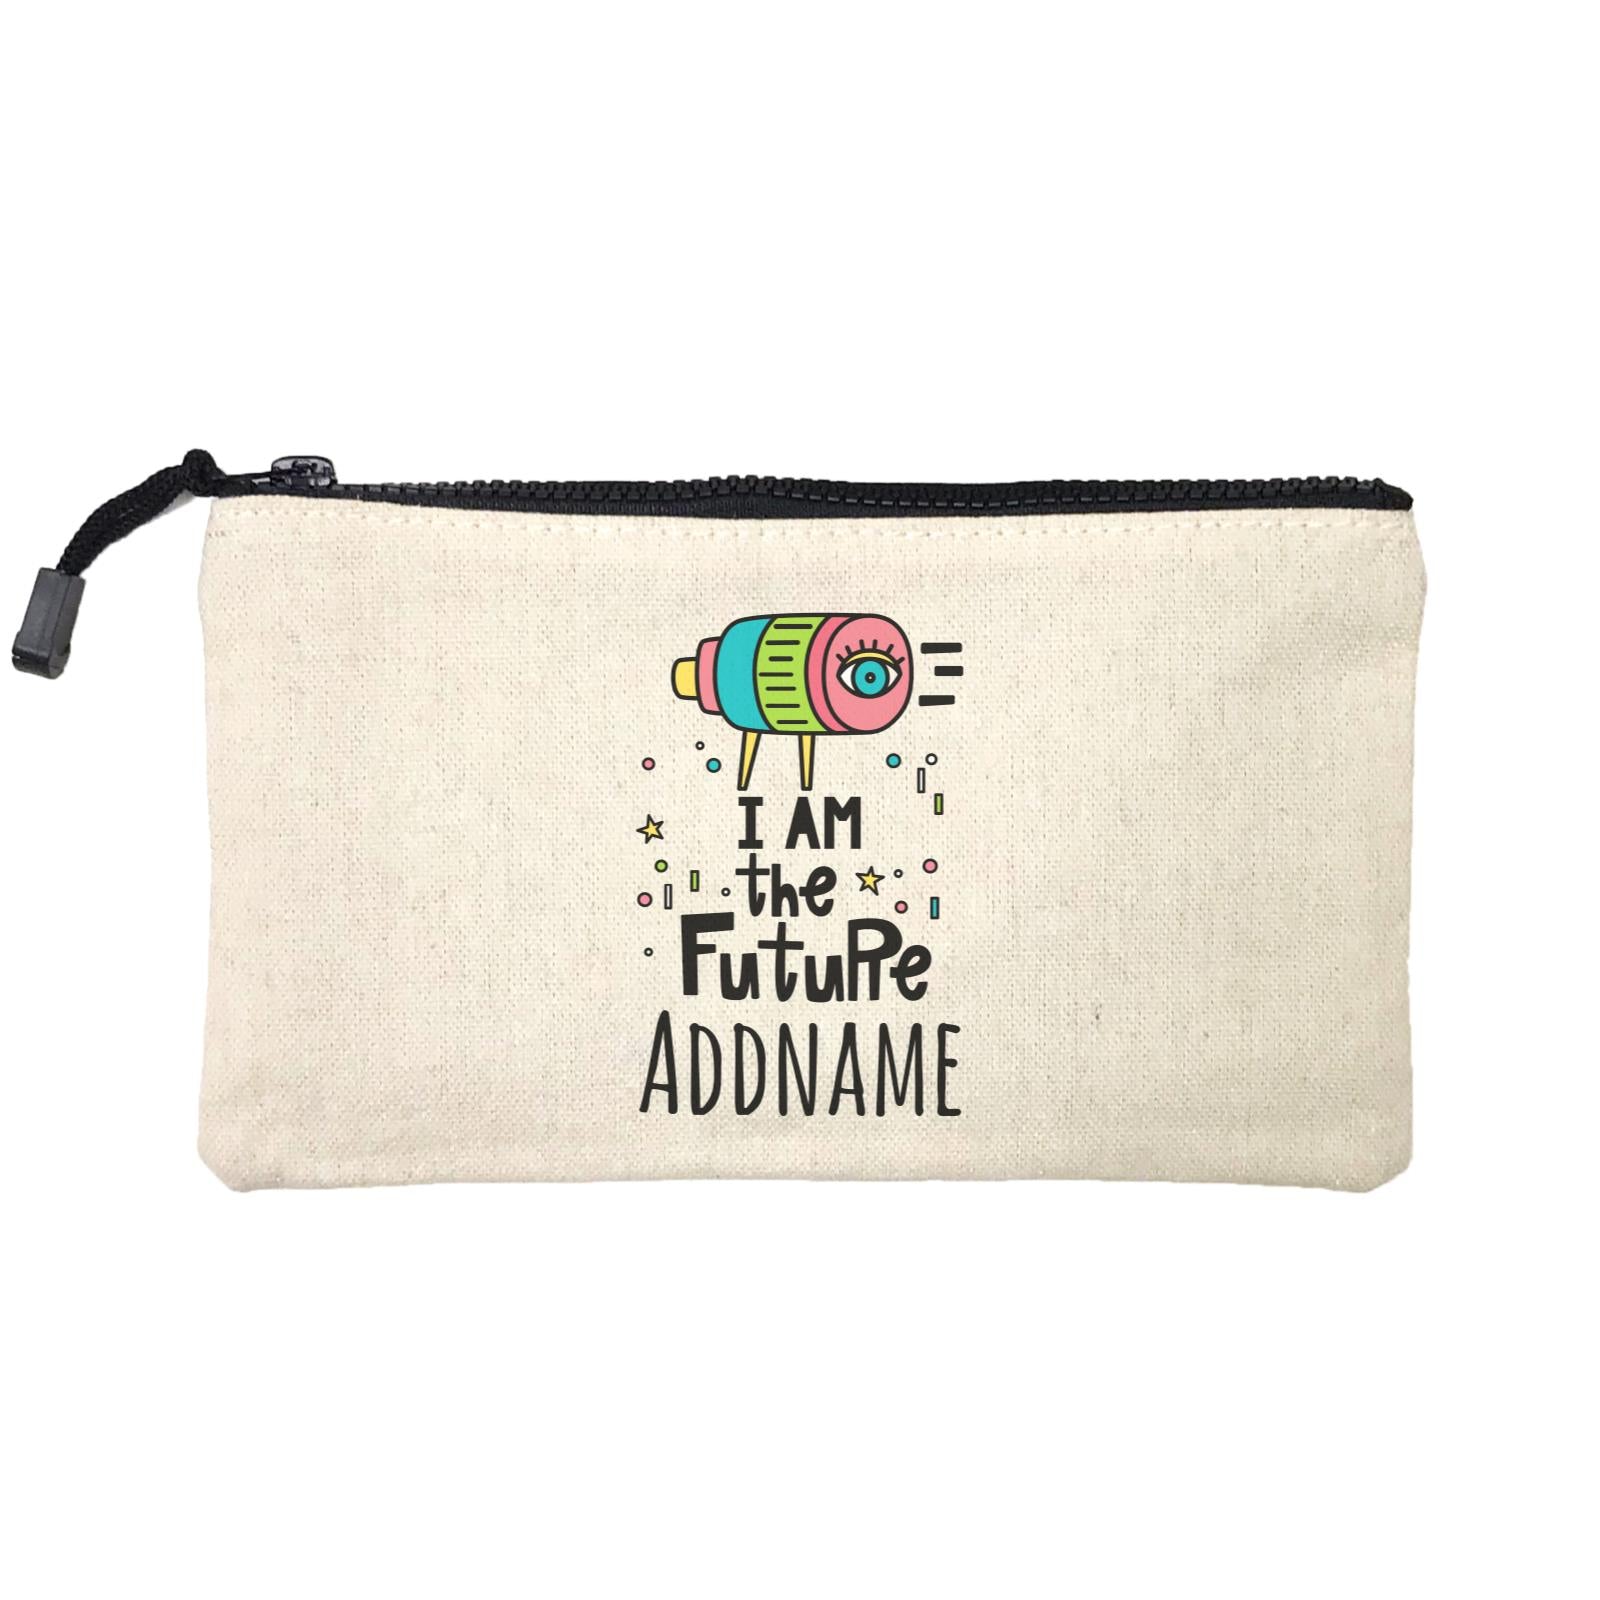 Drawn Baby Elements I Am The Future Addname Mini Accessories Stationery Pouch